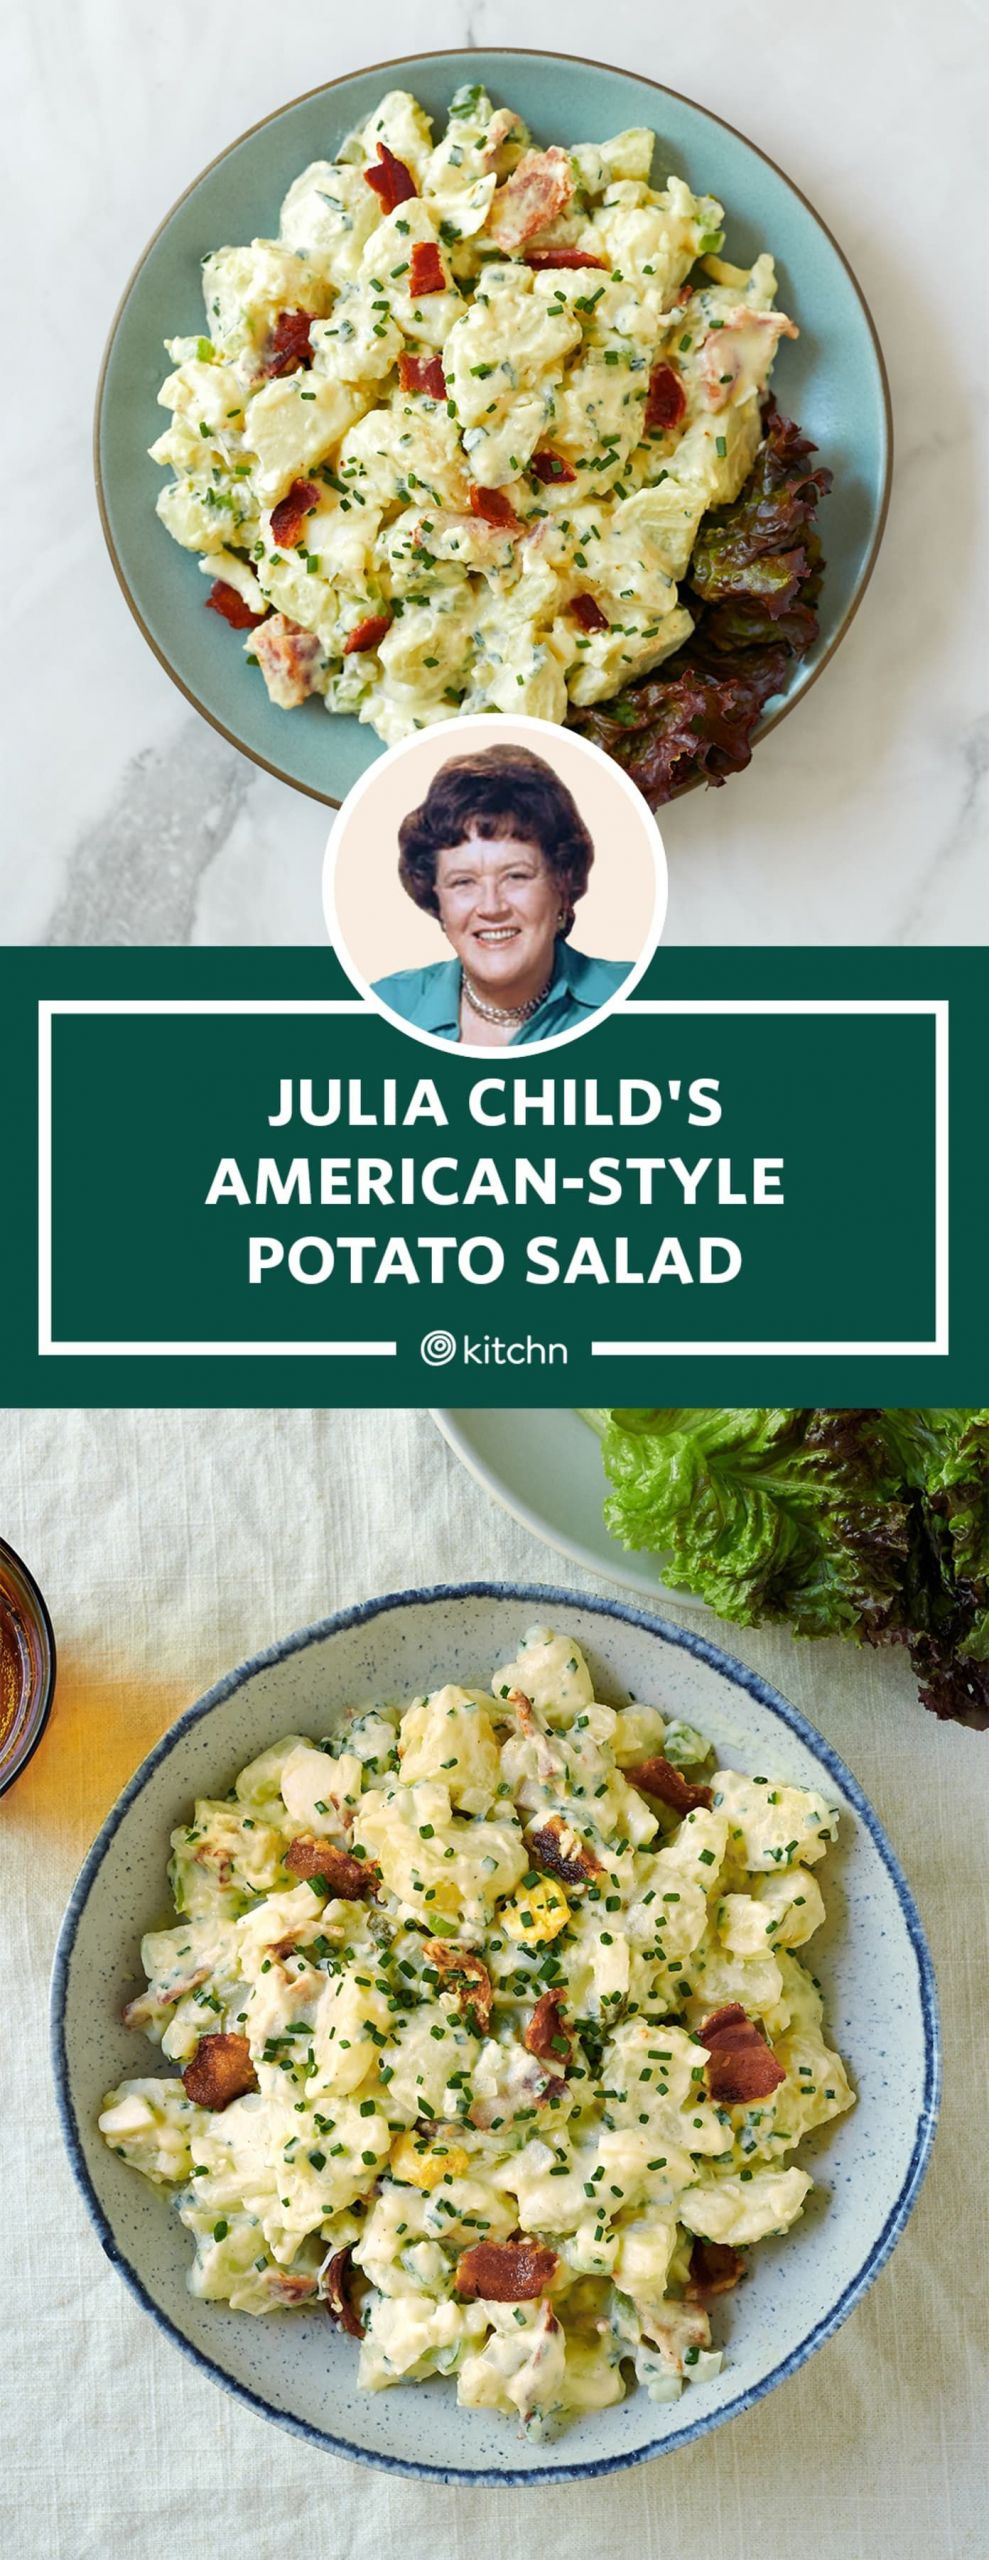 Julia Child Favorite Recipes
 Julia Child Has a Clever Trick for Making the Creamiest